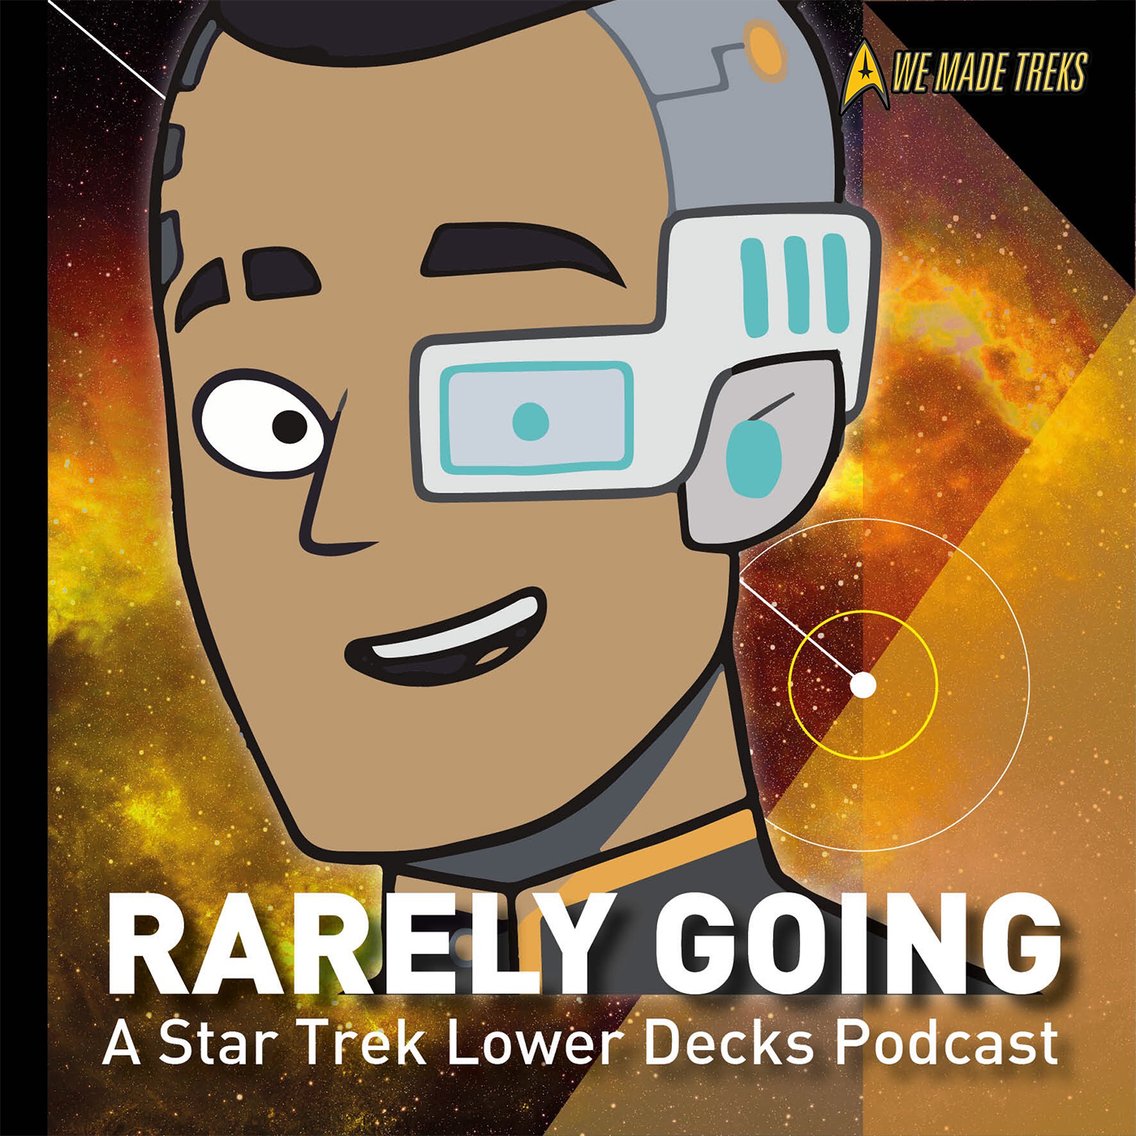 Rarely Going: An Animated Star Trek Podcast - Cover Image